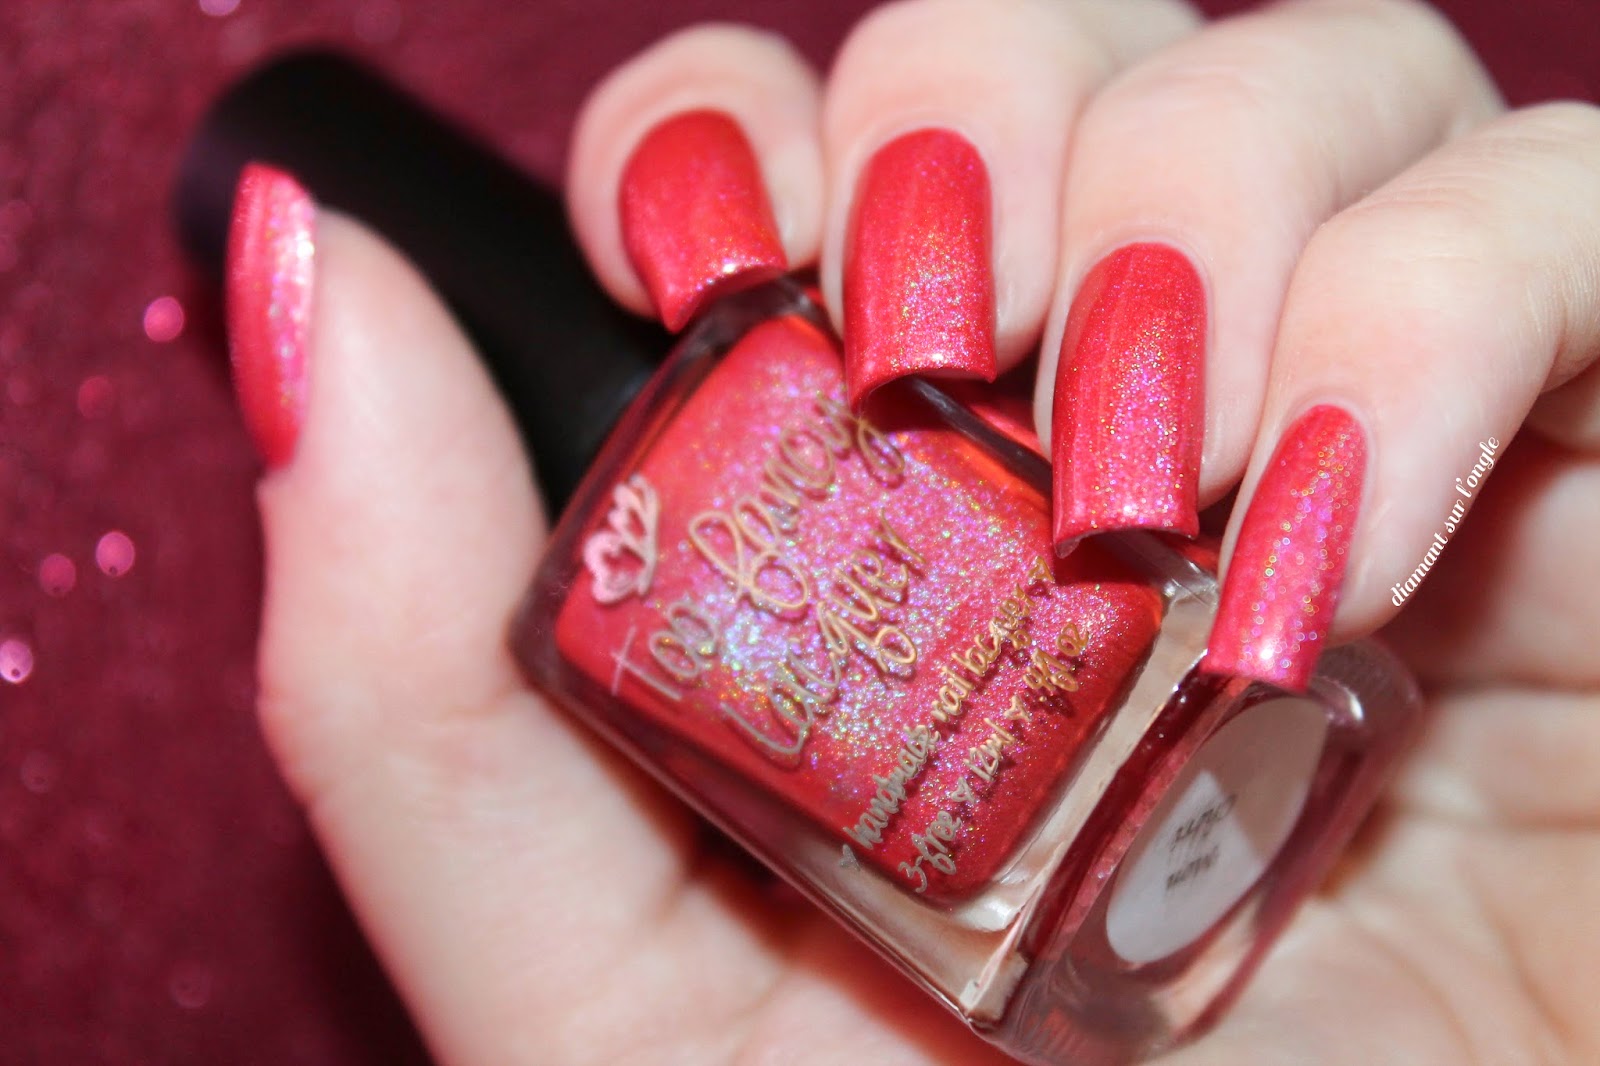 Swatch of "Mon Chéri" from Too Fancy Lacquer